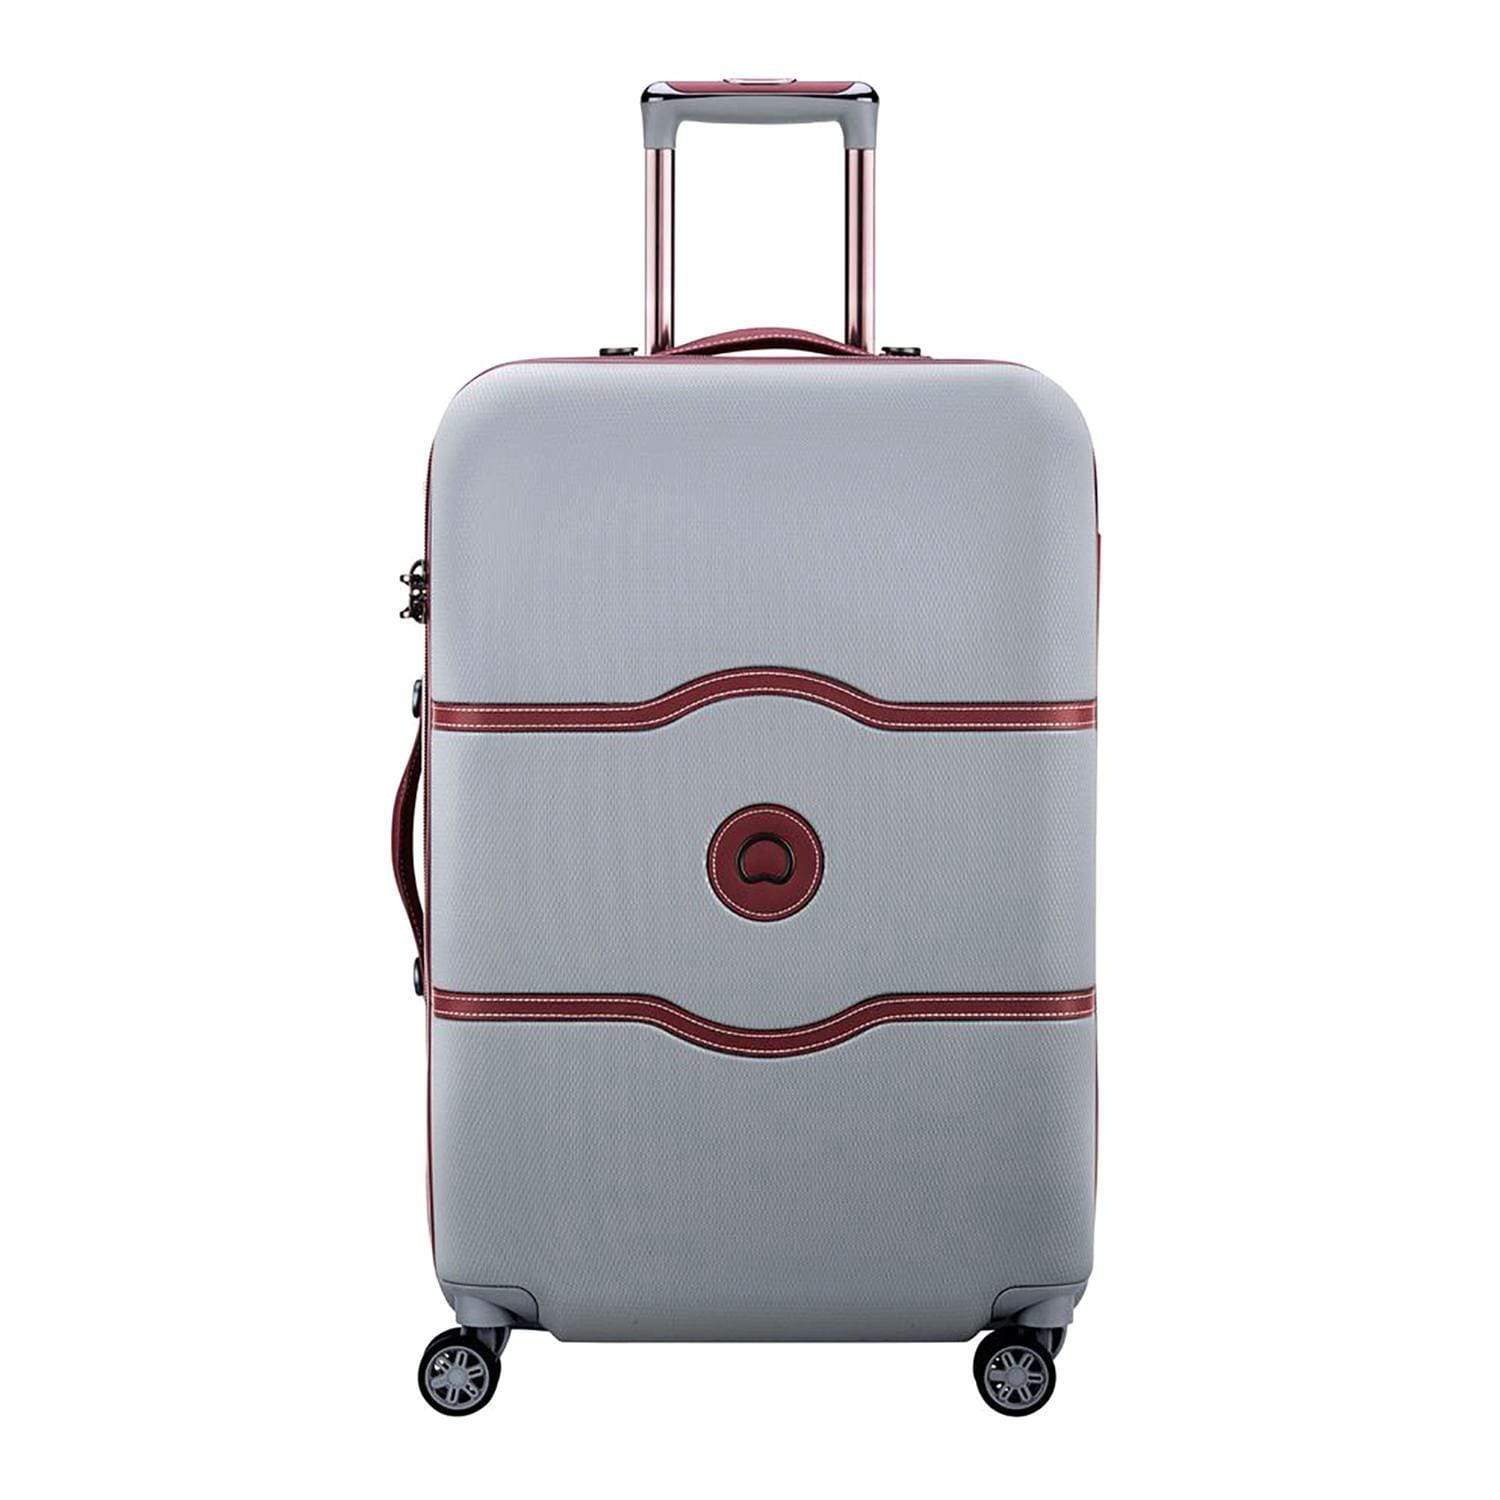 Delsey Chatelet Air 4 Double Wheel Cabin Trolley Case - Silver - 00167281011 SILVER - Jashanmal Home